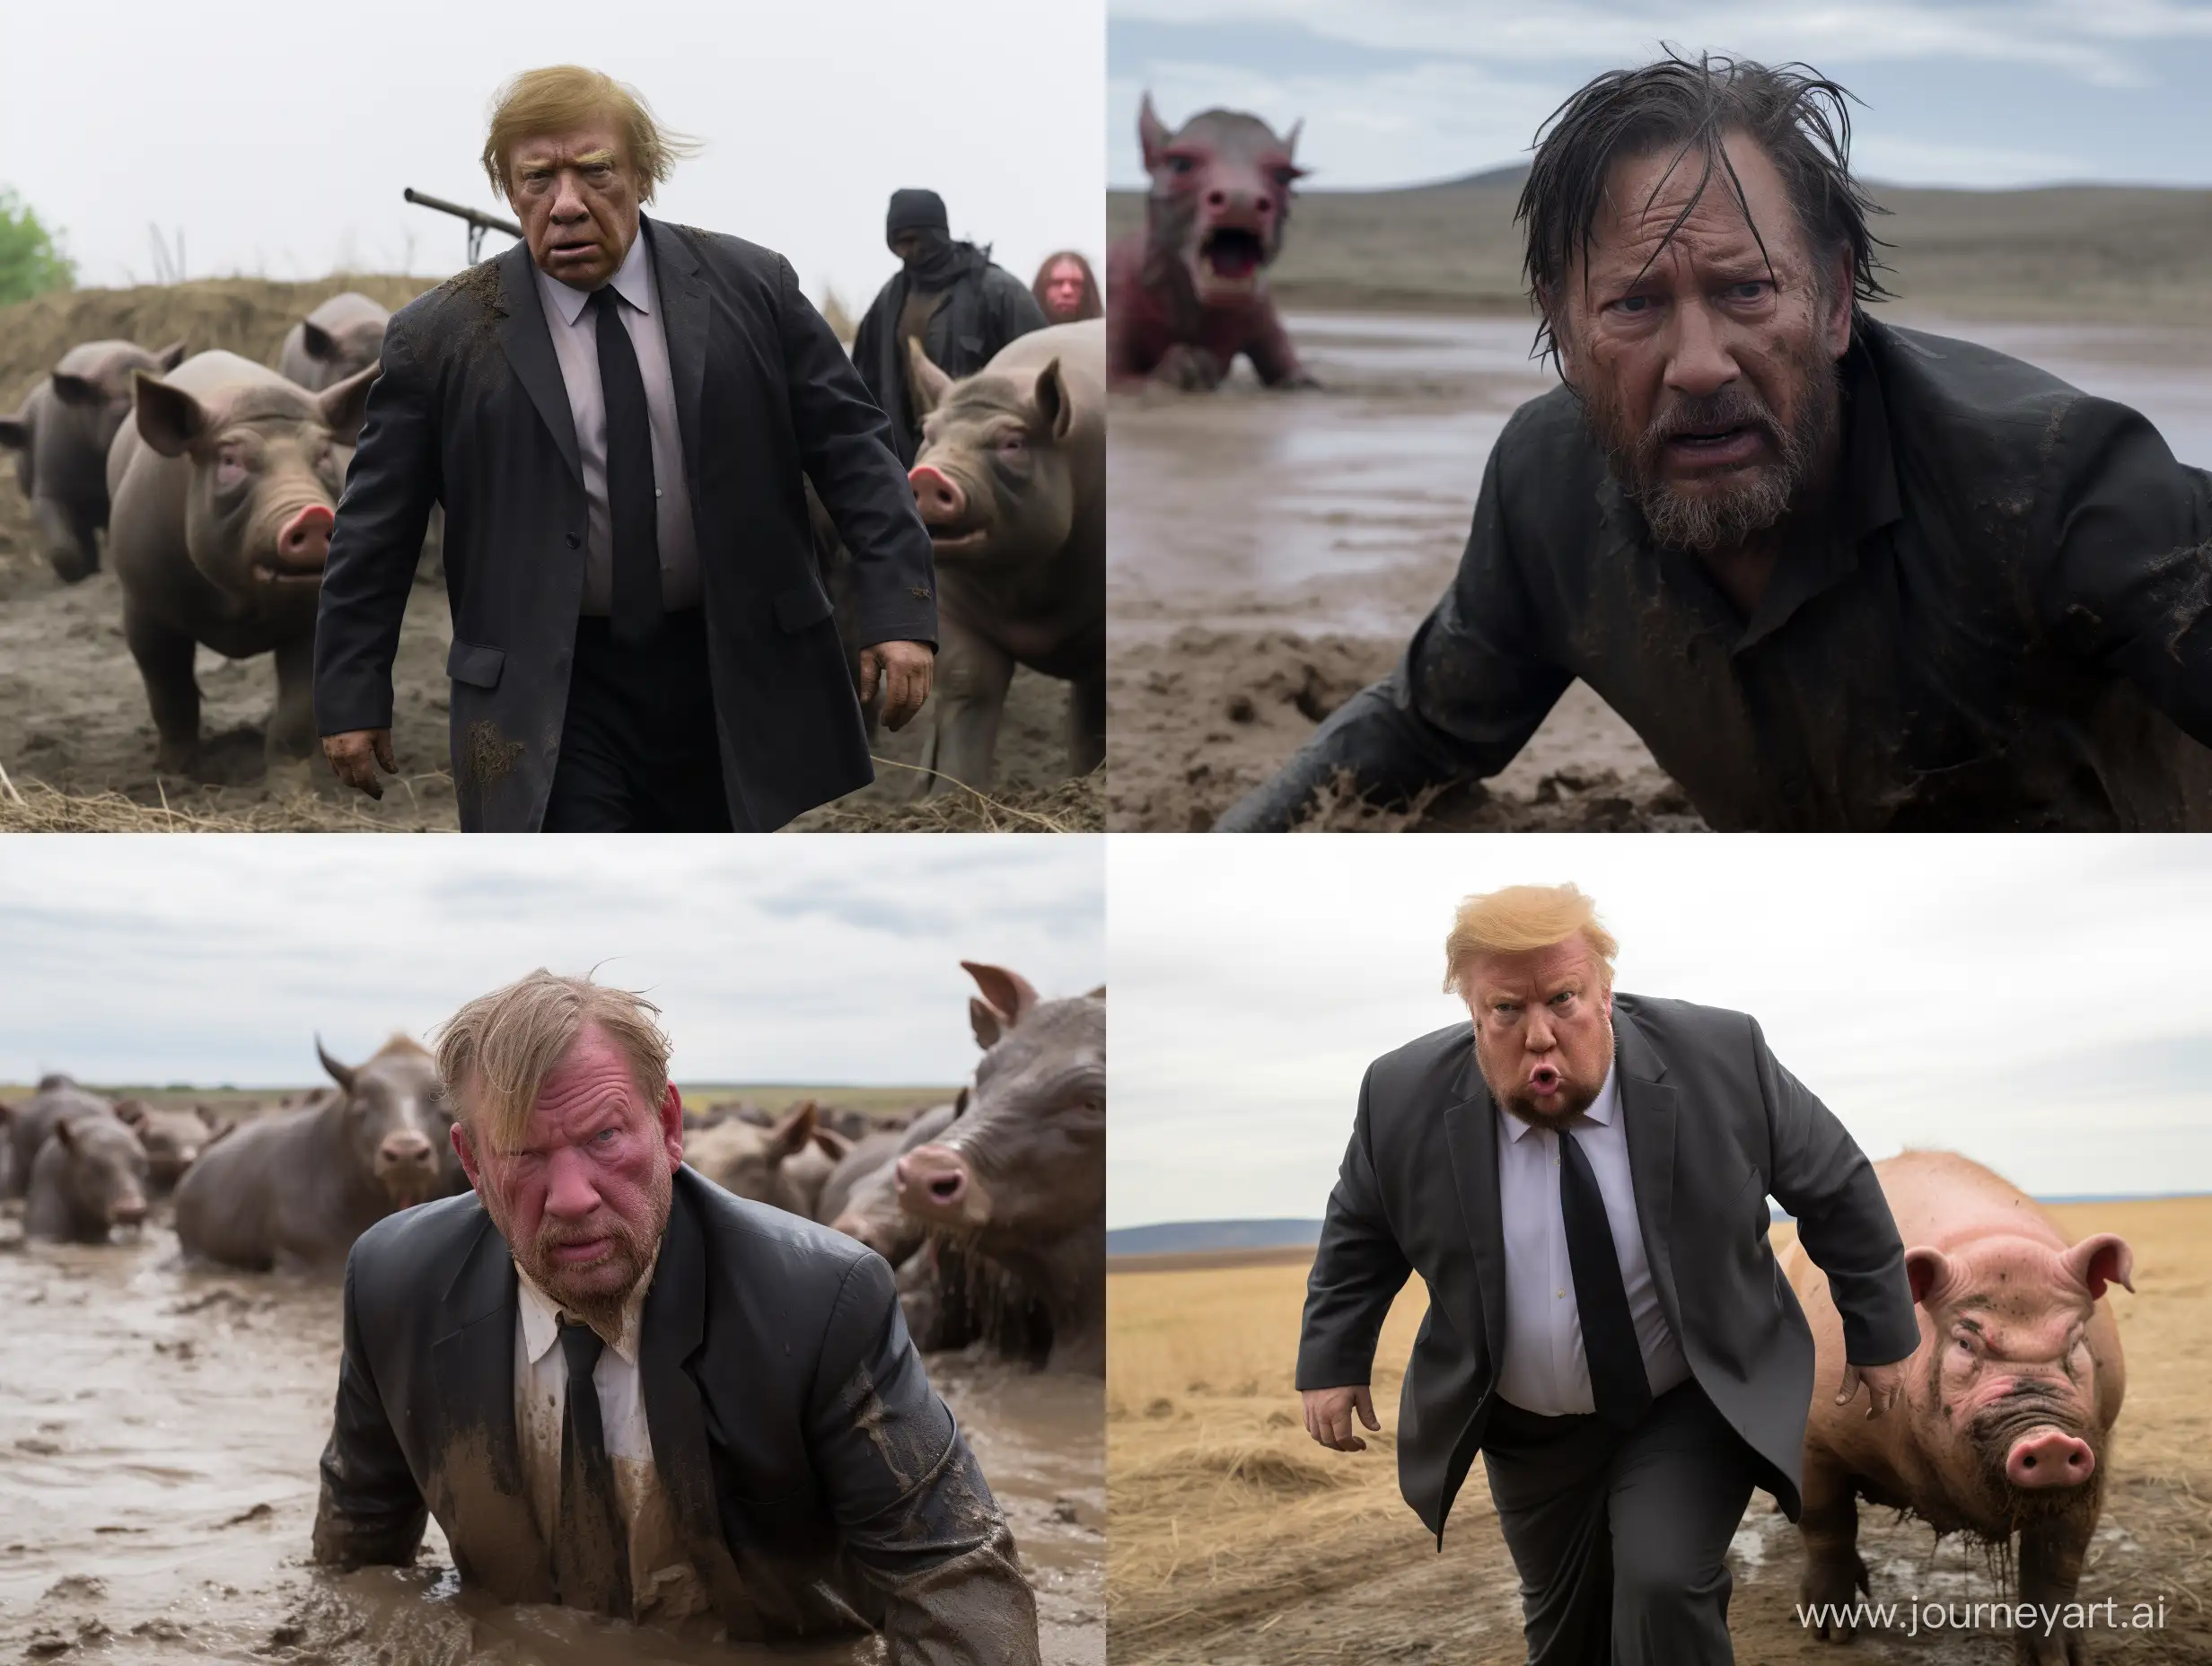 Donald Trump jumps in the mud with pigs, and John Wick breaks down the farm